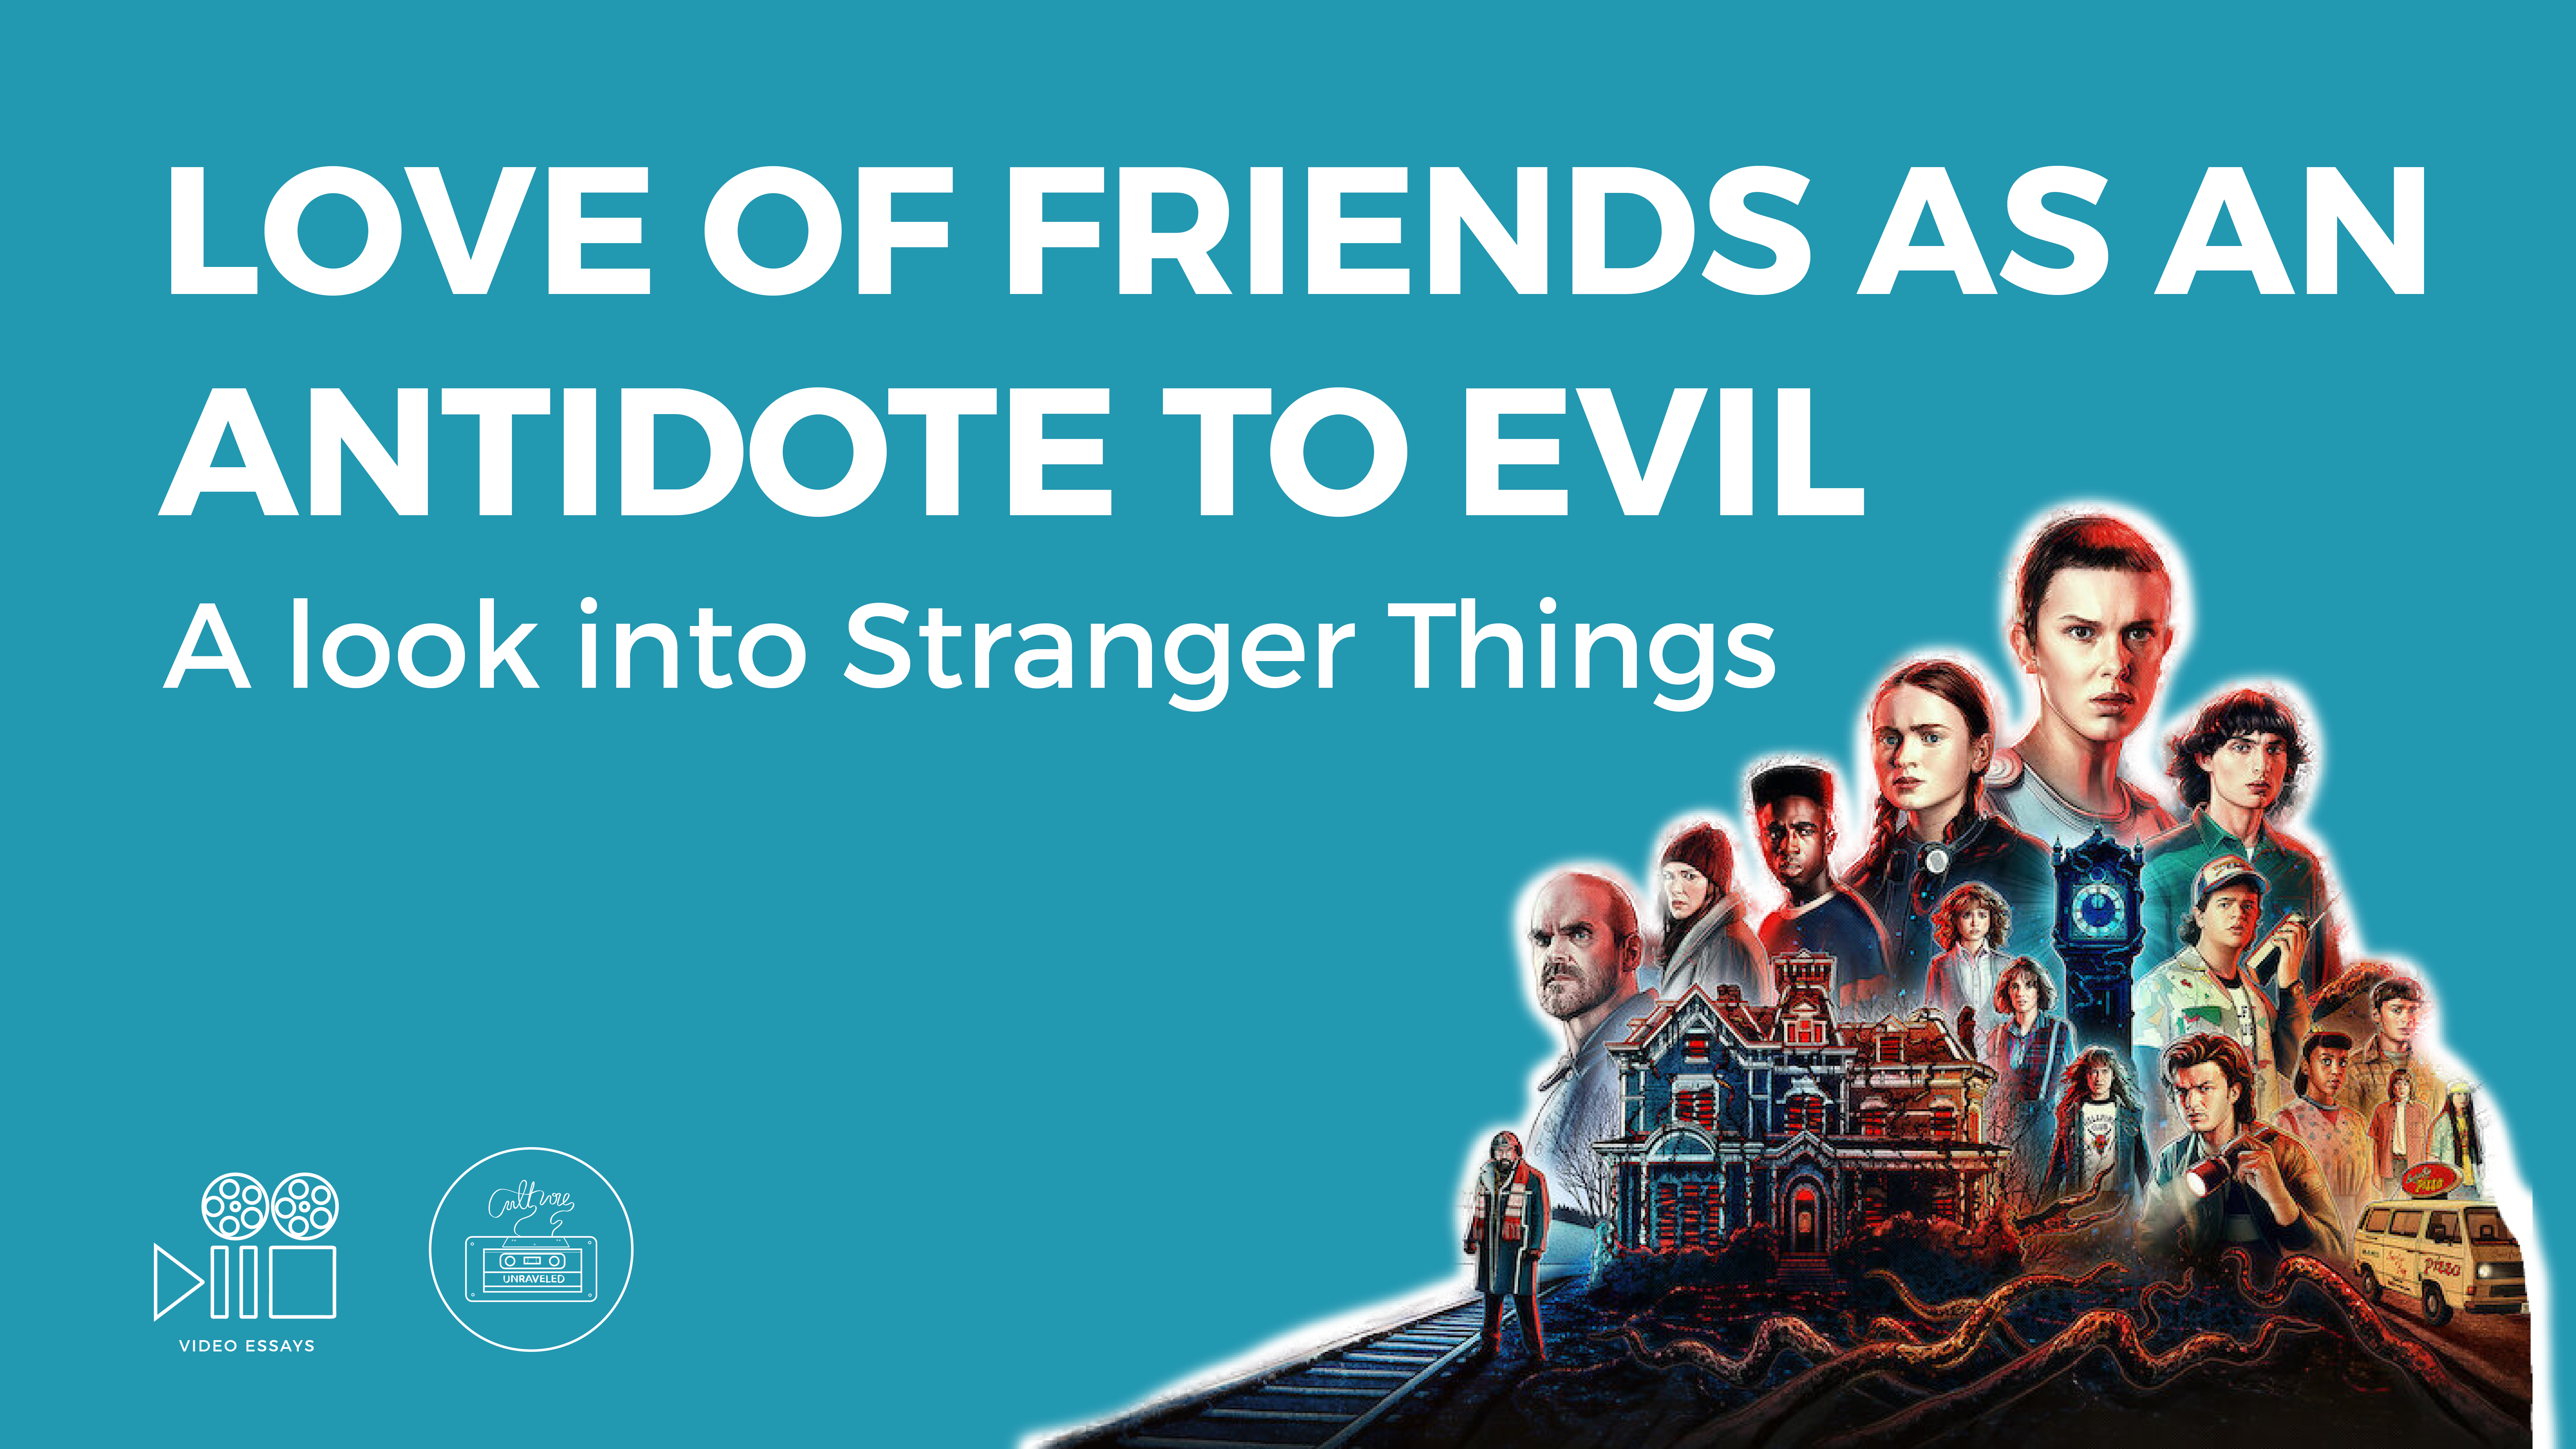 Love of Friends as an Antidote to Evil. A Look into Stranger Things